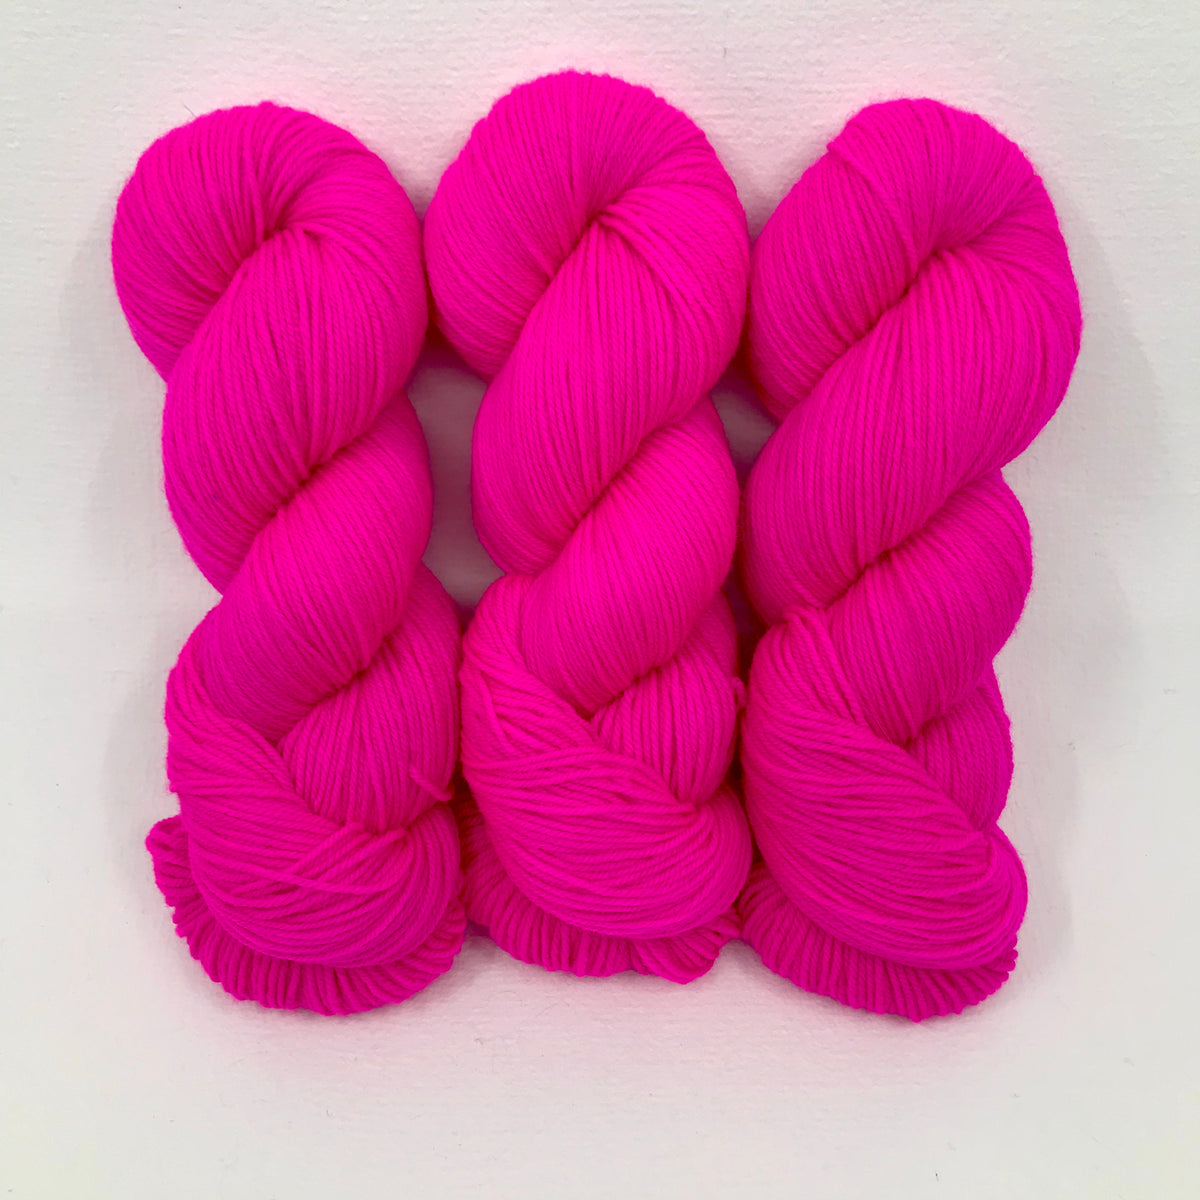 Pink Light Sabre - Passion 8 Fingering - Dyed Stock